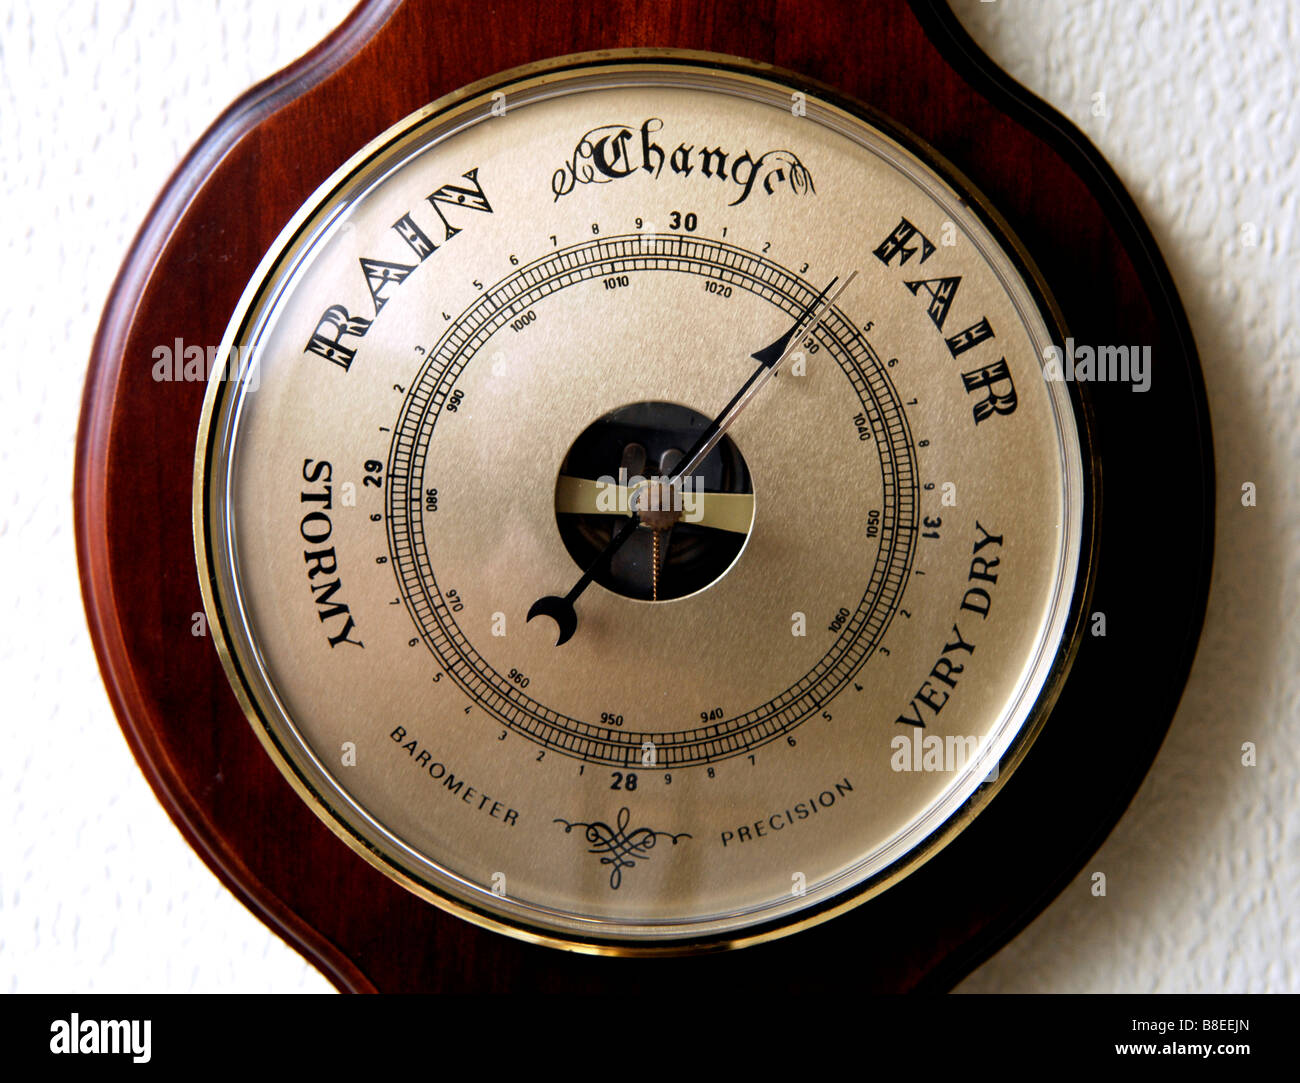 A barometer used for weather forecasting measuring the barometric pressure Stock Photo